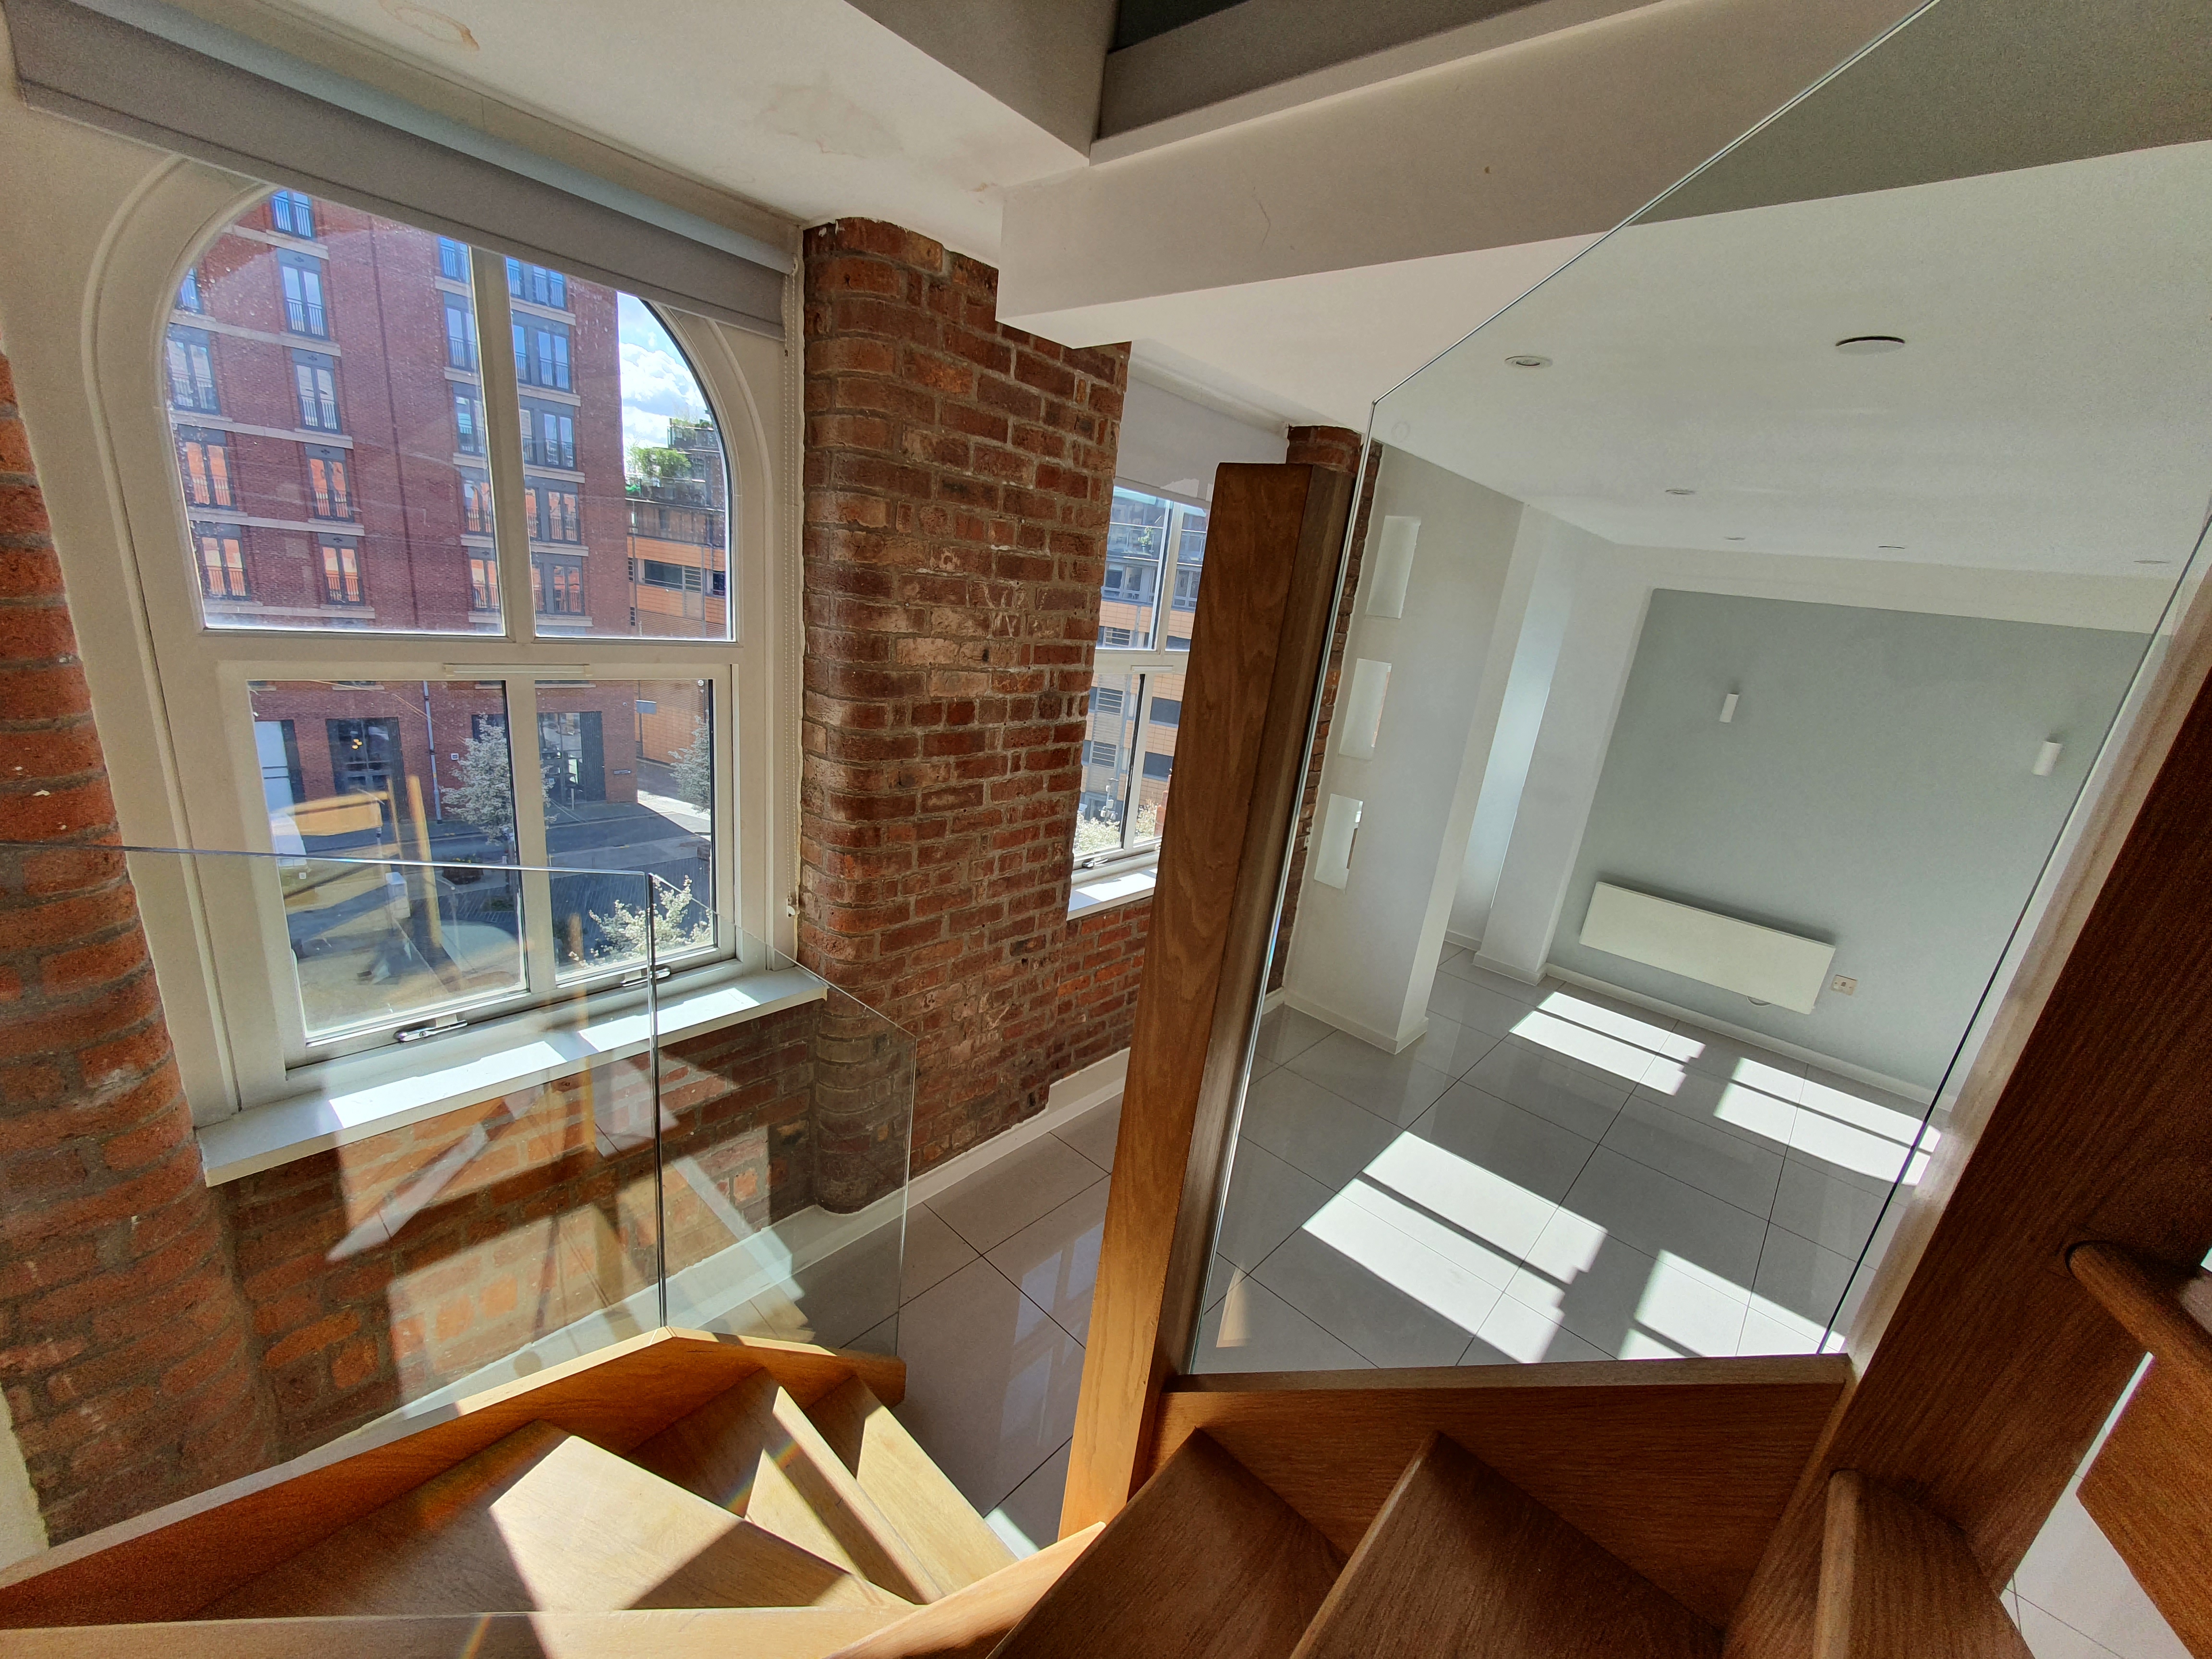 Ice Plant duplex apartment with stairs and exposed brickwork